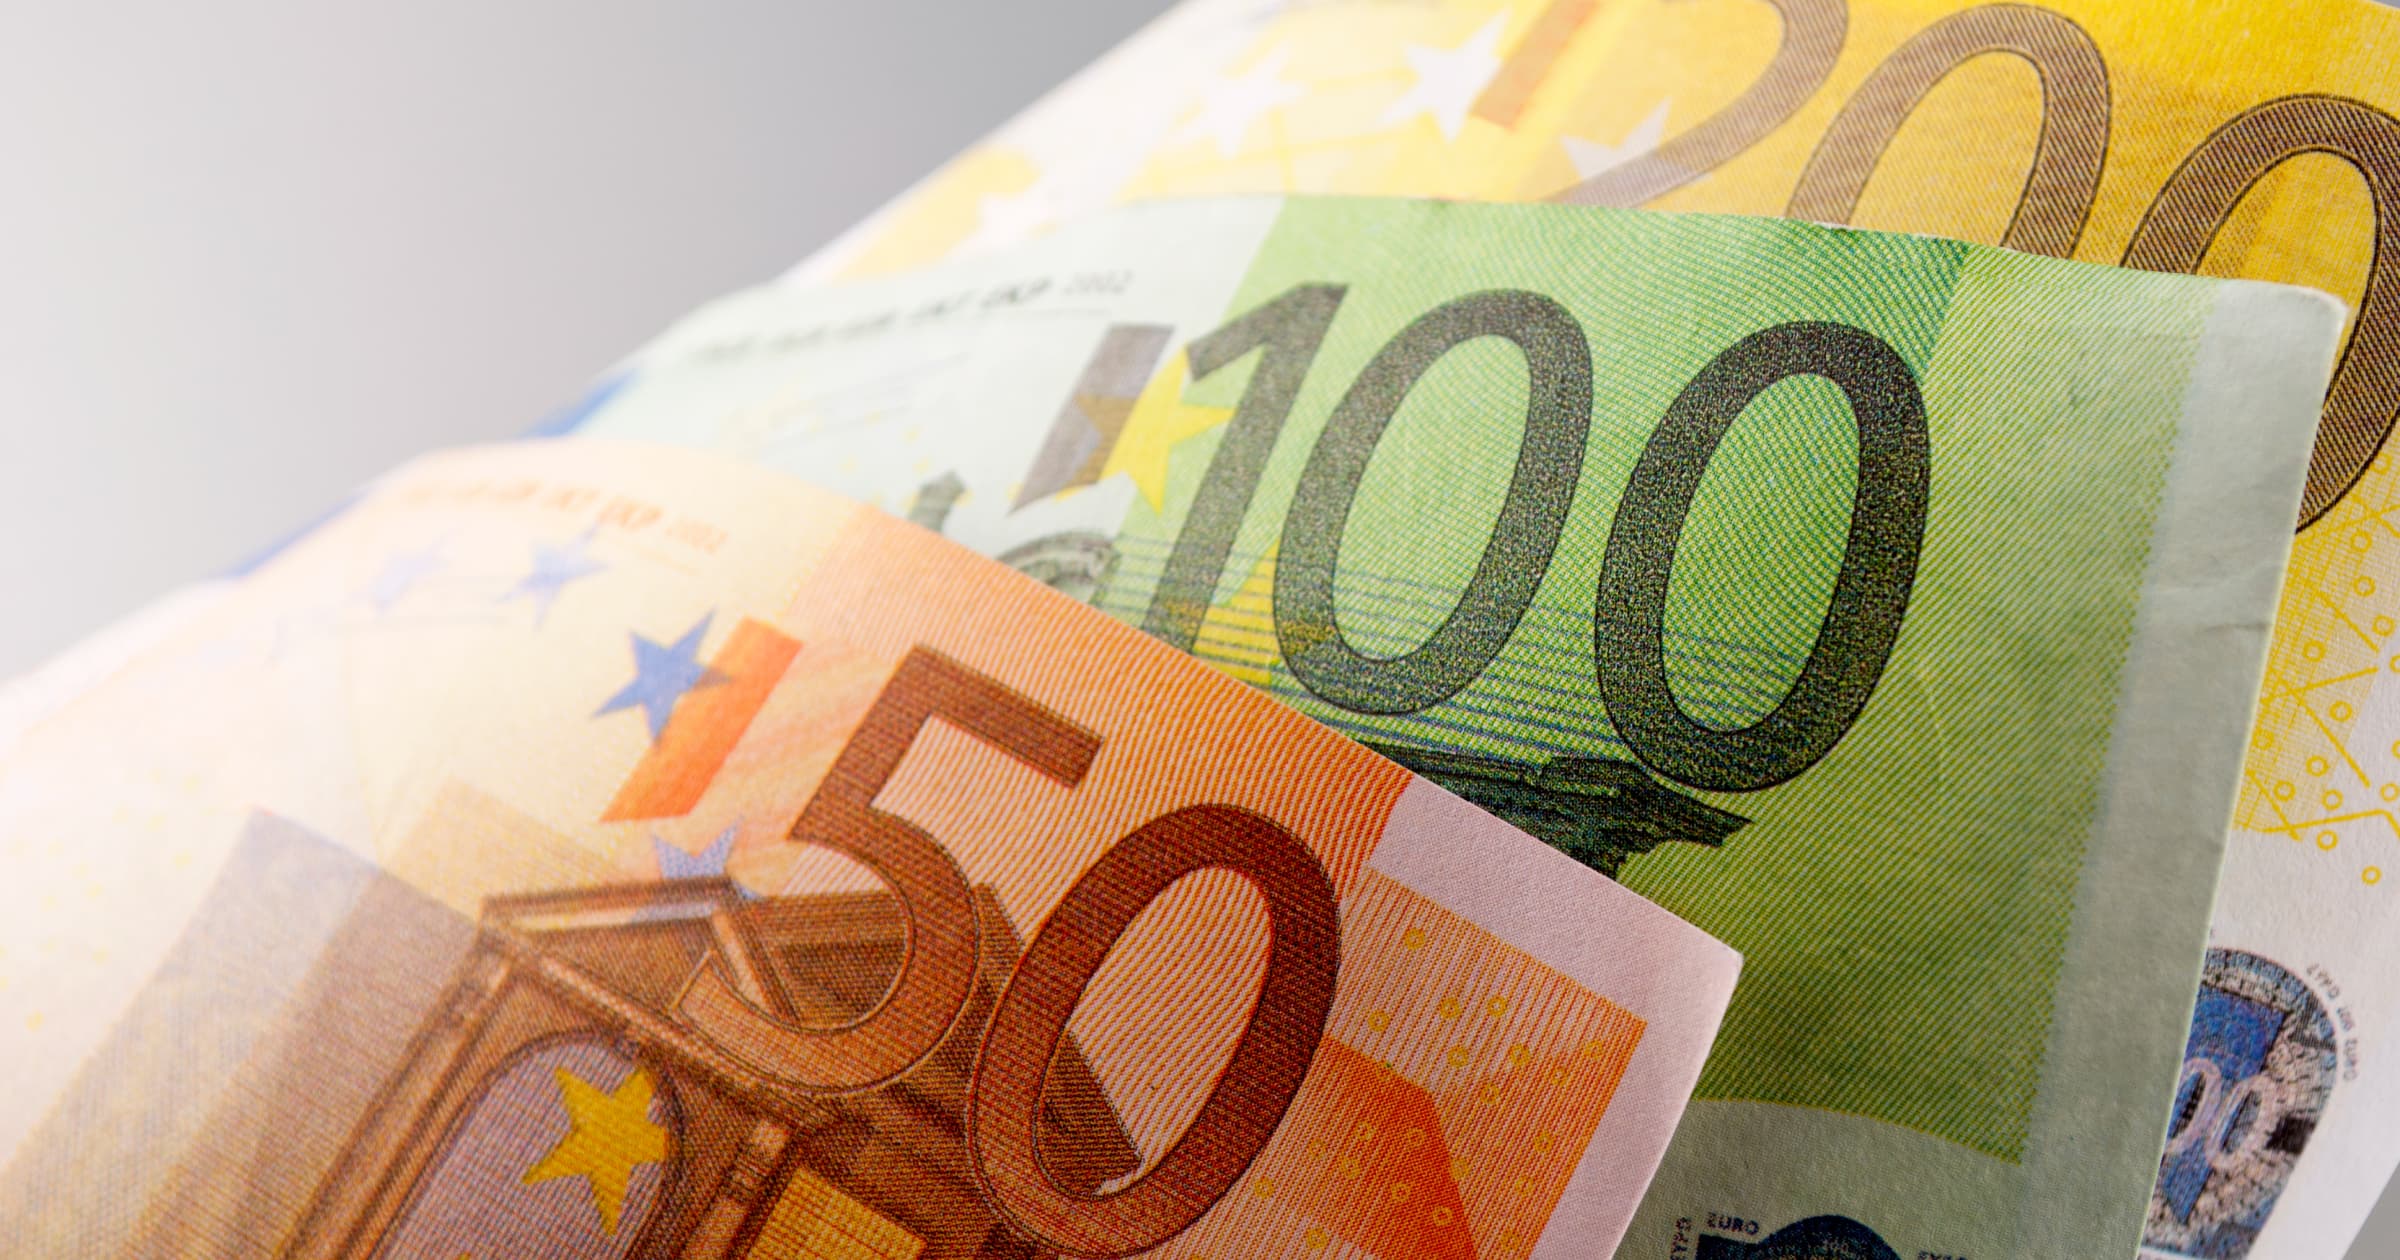 Olaf Scholz confirmed the allocation of €5 billion macro-financial aid from the EU